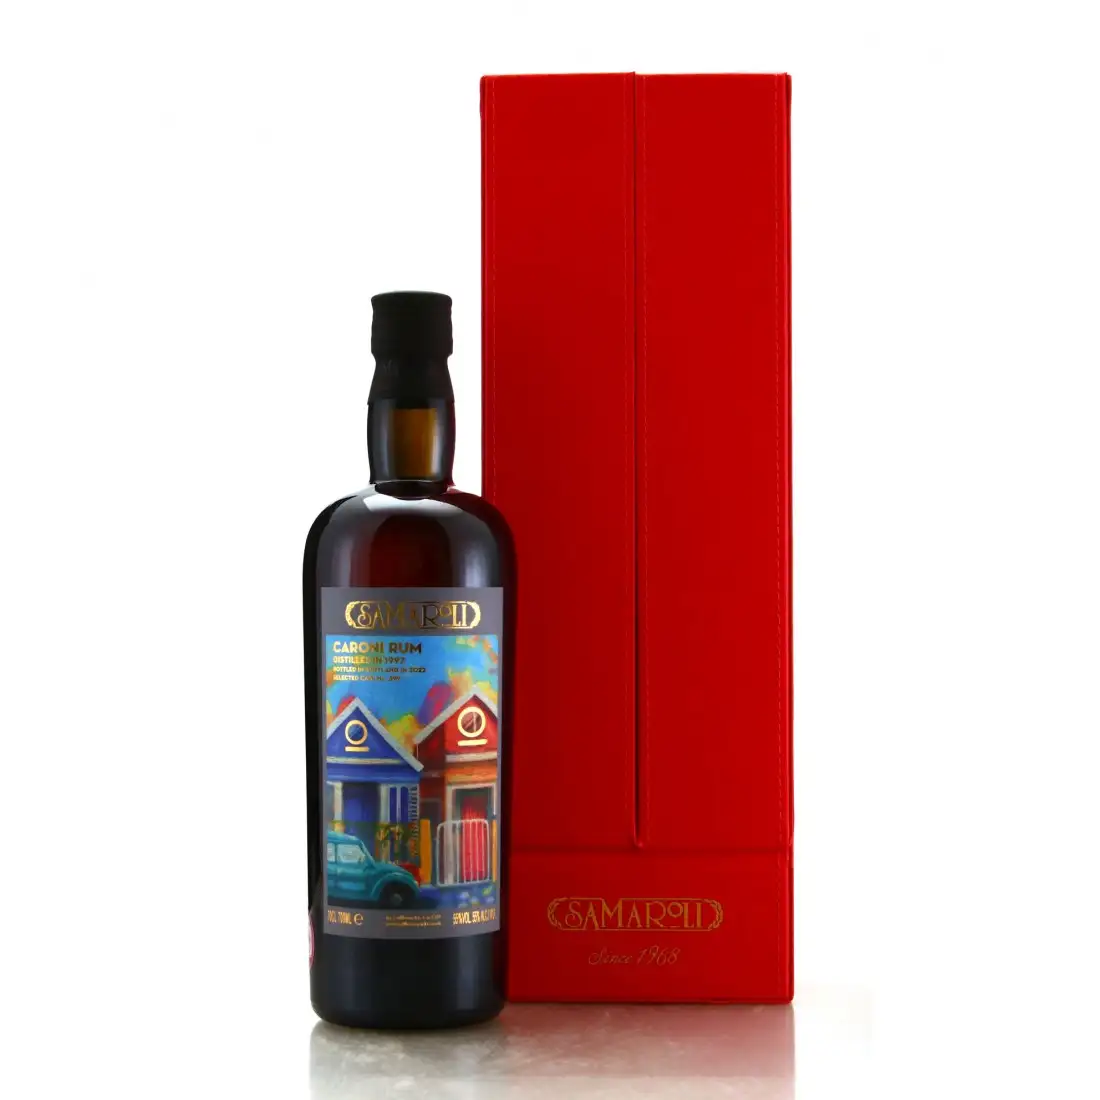 Image of the front of the bottle of the rum Caroni Rum